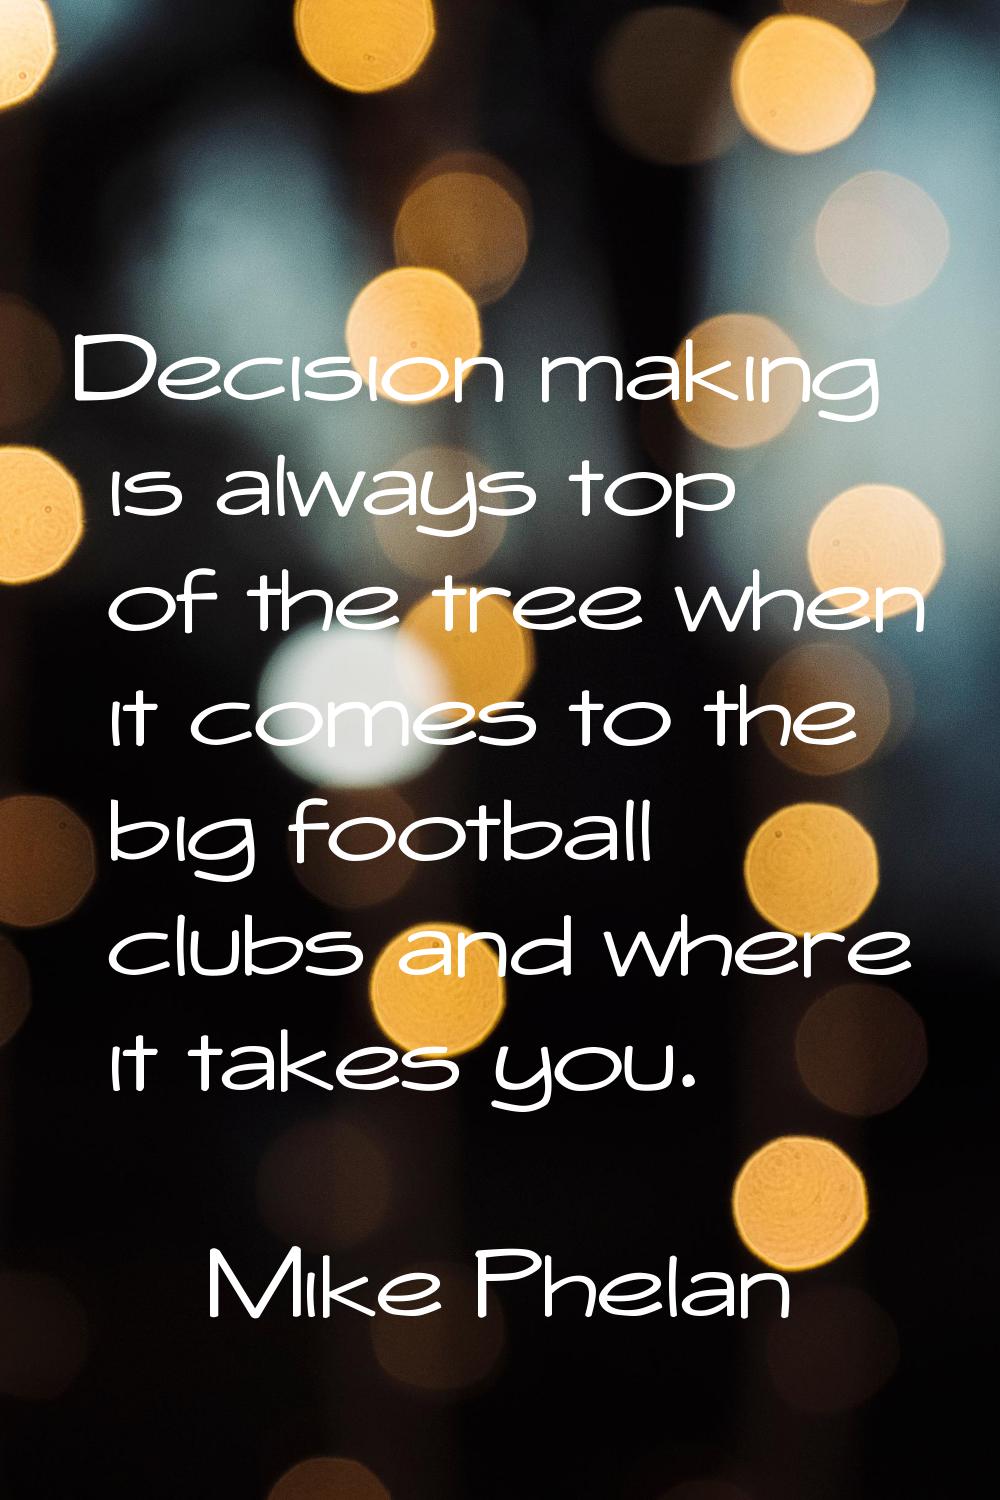 Decision making is always top of the tree when it comes to the big football clubs and where it take